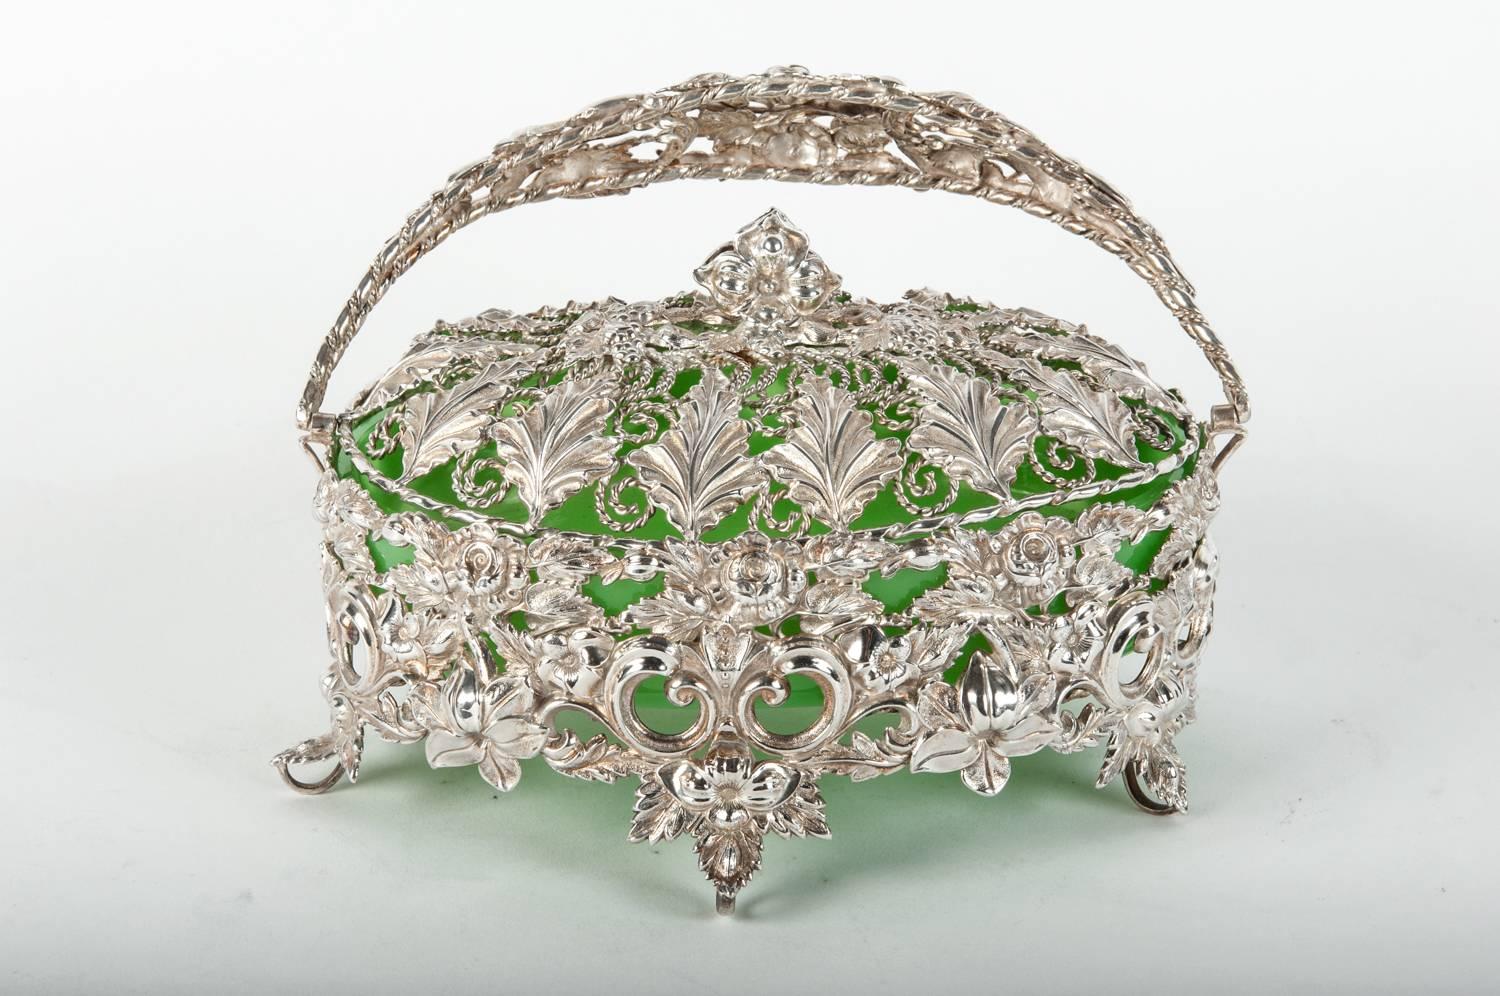 Antique English Silver Plated Basket Dish with Celadon Glass Insert 4